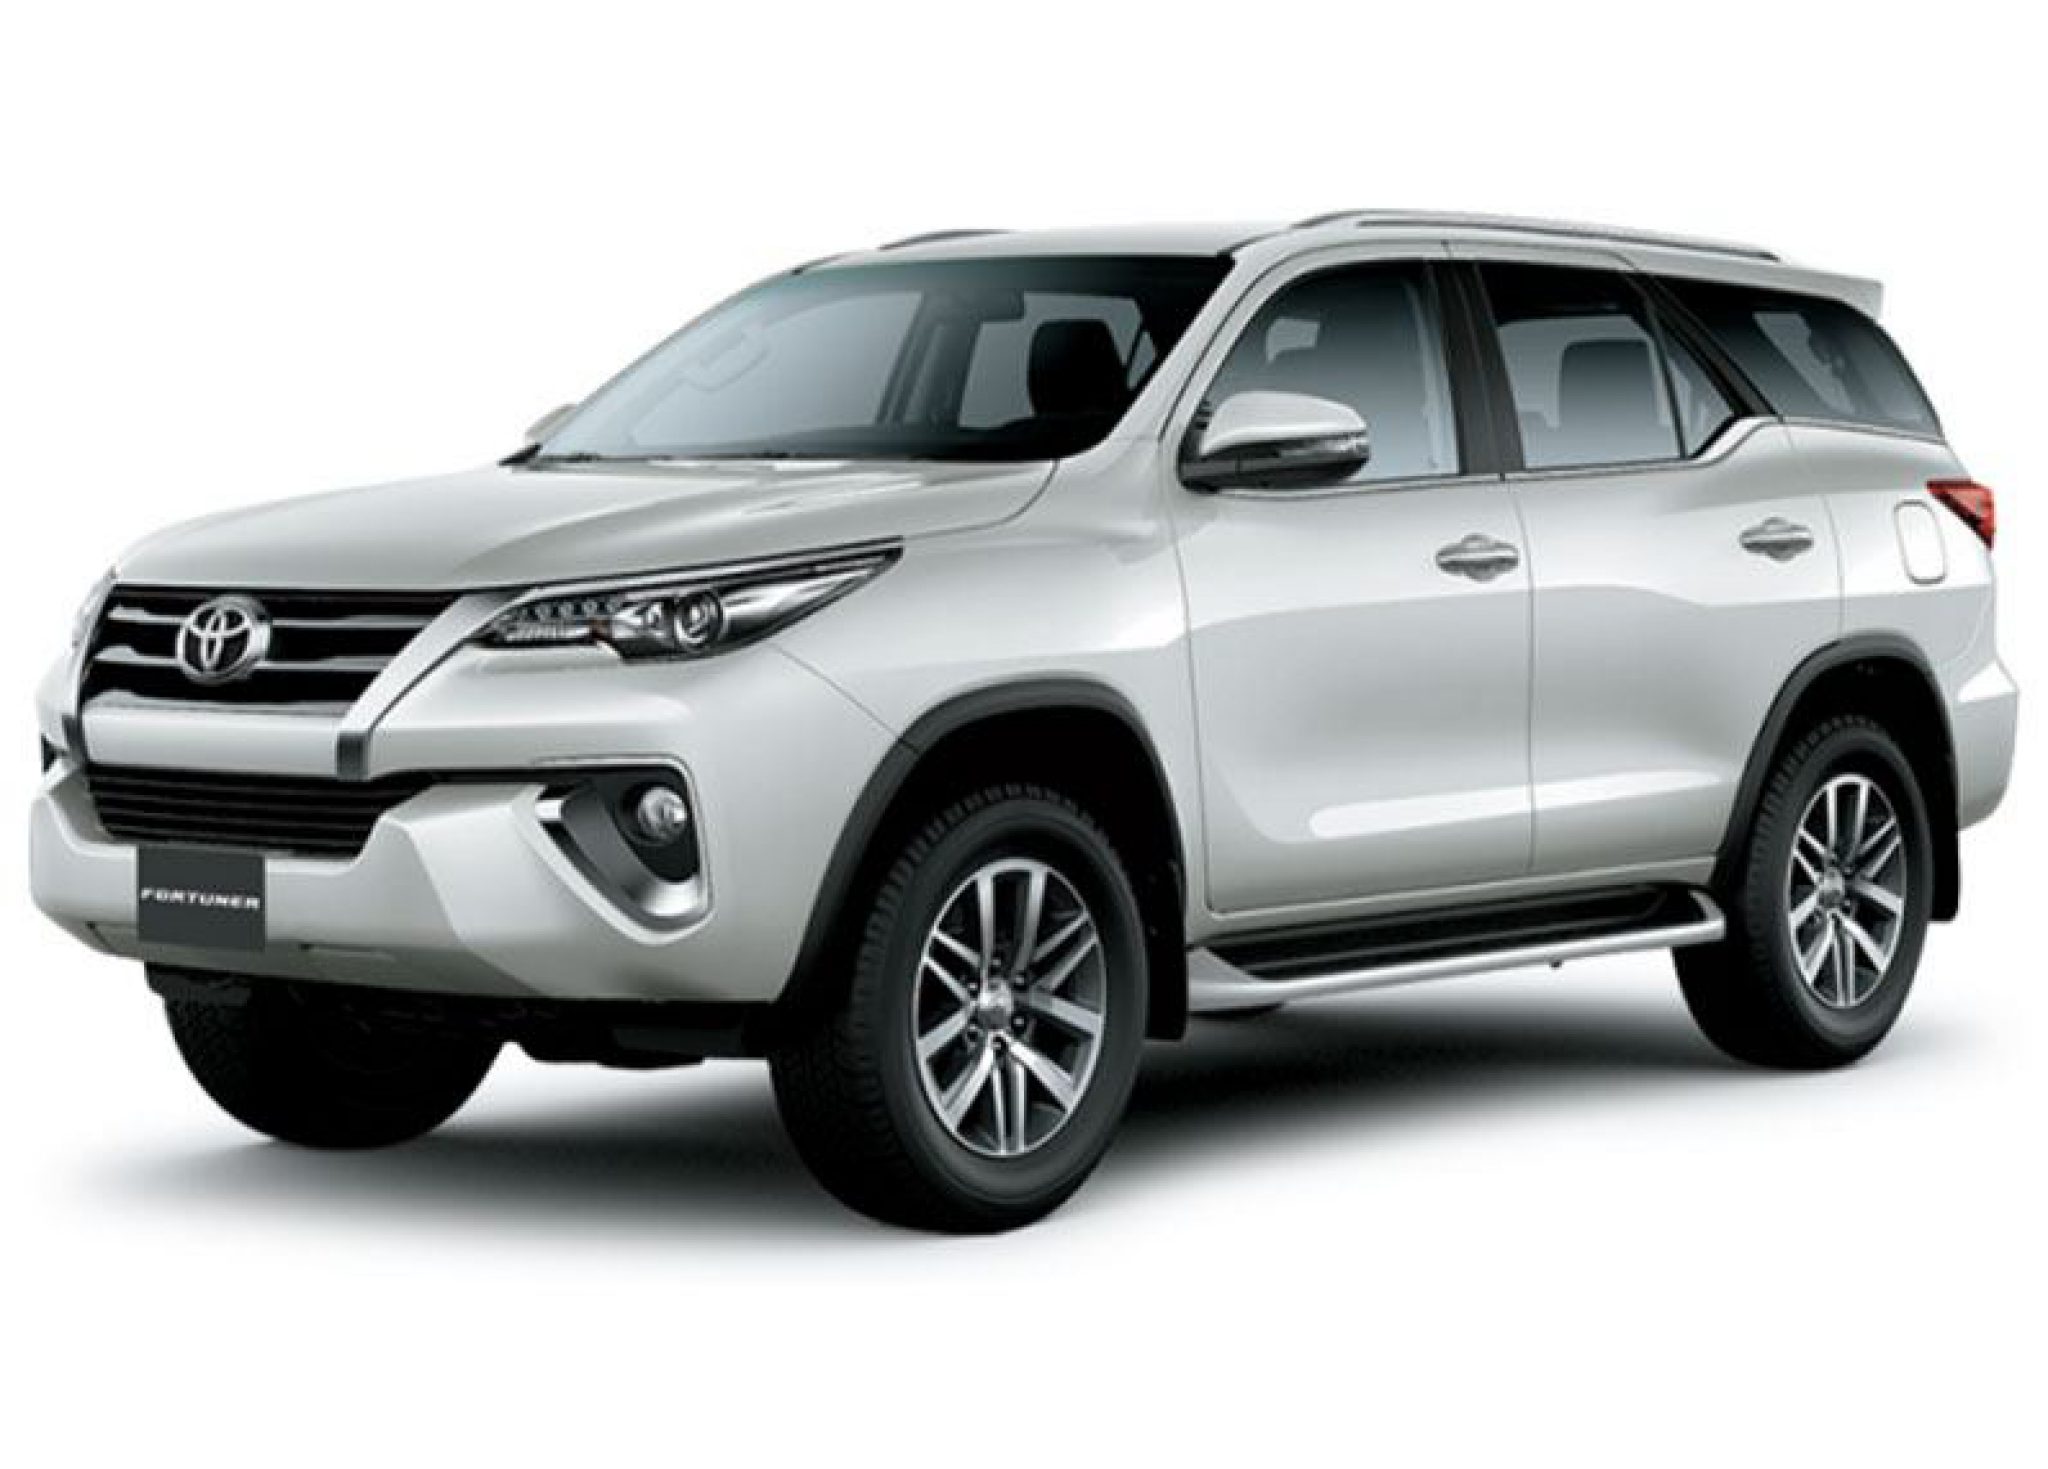 List Of All Toyota Suvs In The Philippines Price List With Brief Review ...